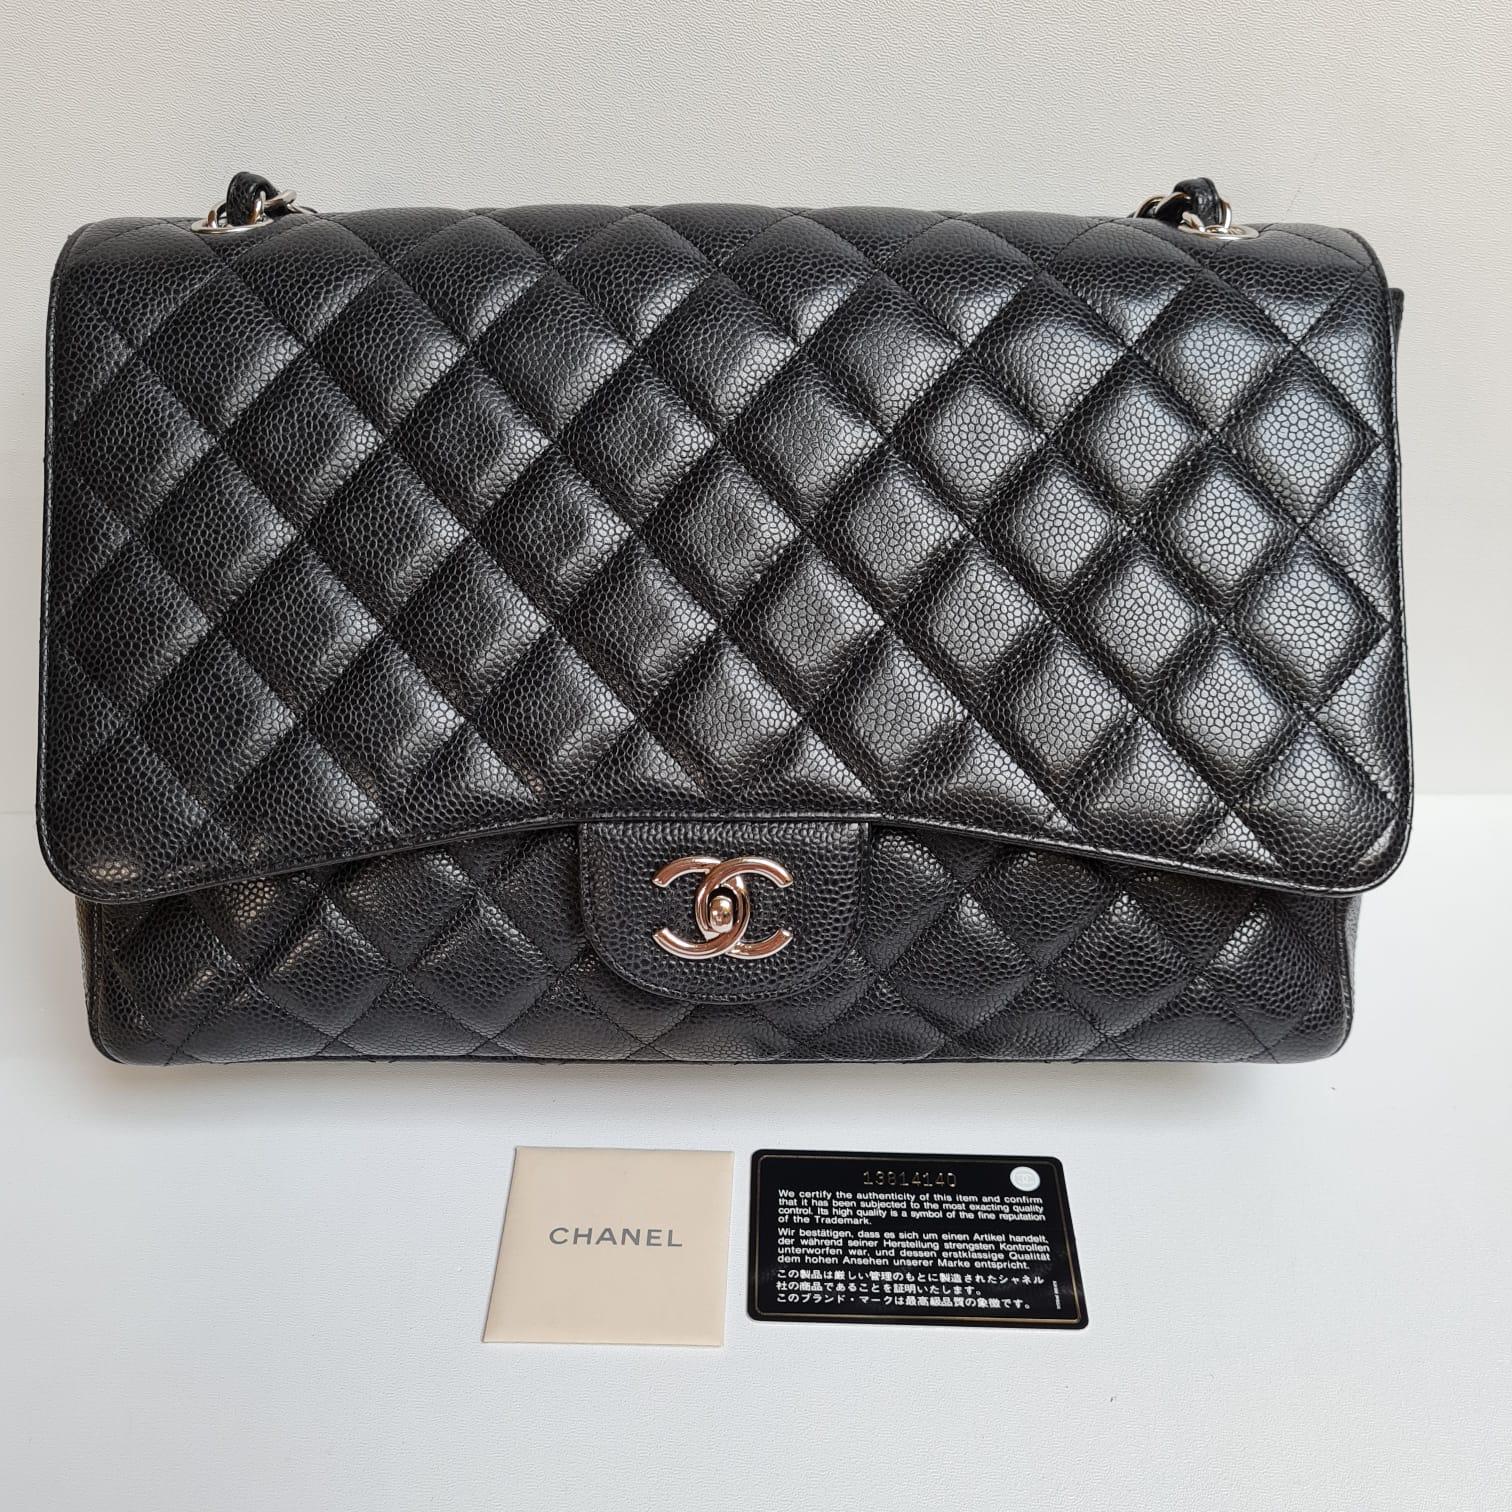 Chanel Black Maxi Caviar Leather Quilted Single Flap Bag 10